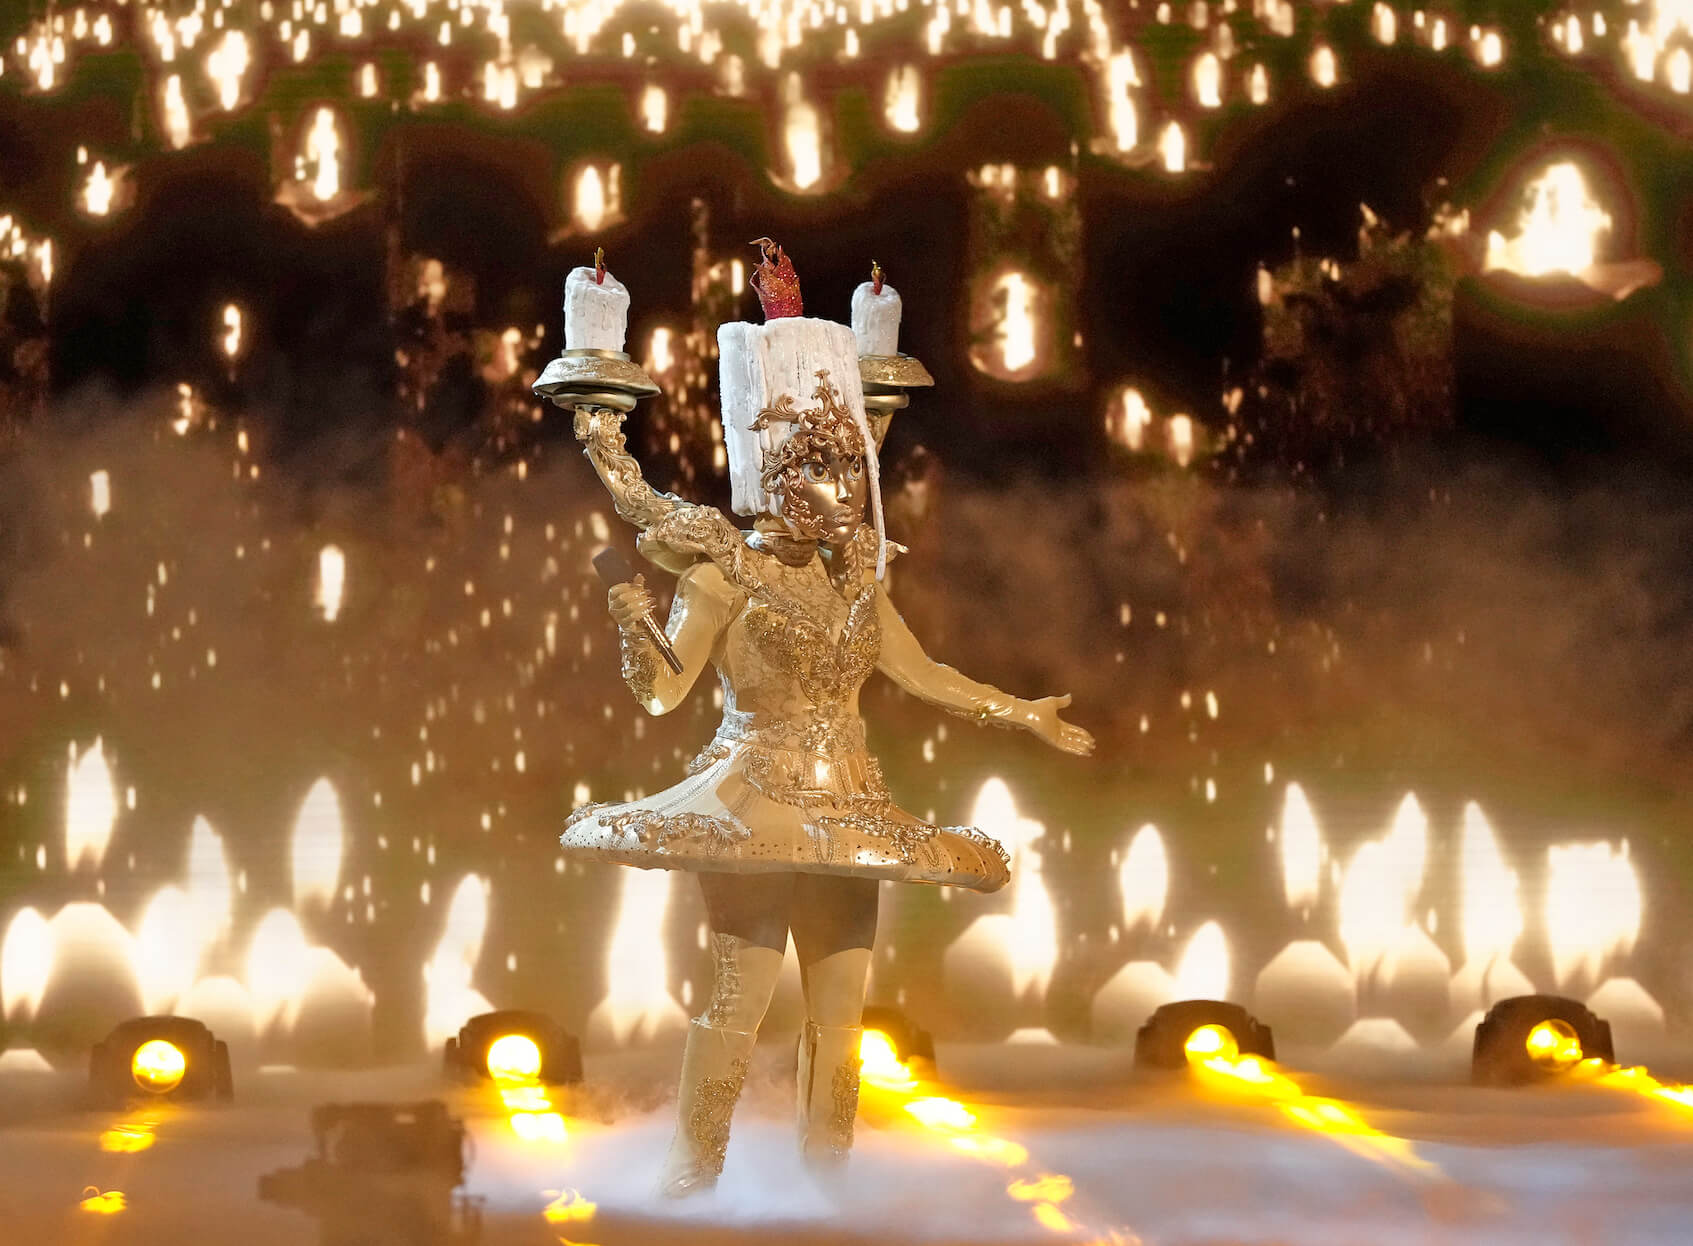 'The Masked Singer' Season 10 mask Candelabra singing on stage surrounded by candle imagery